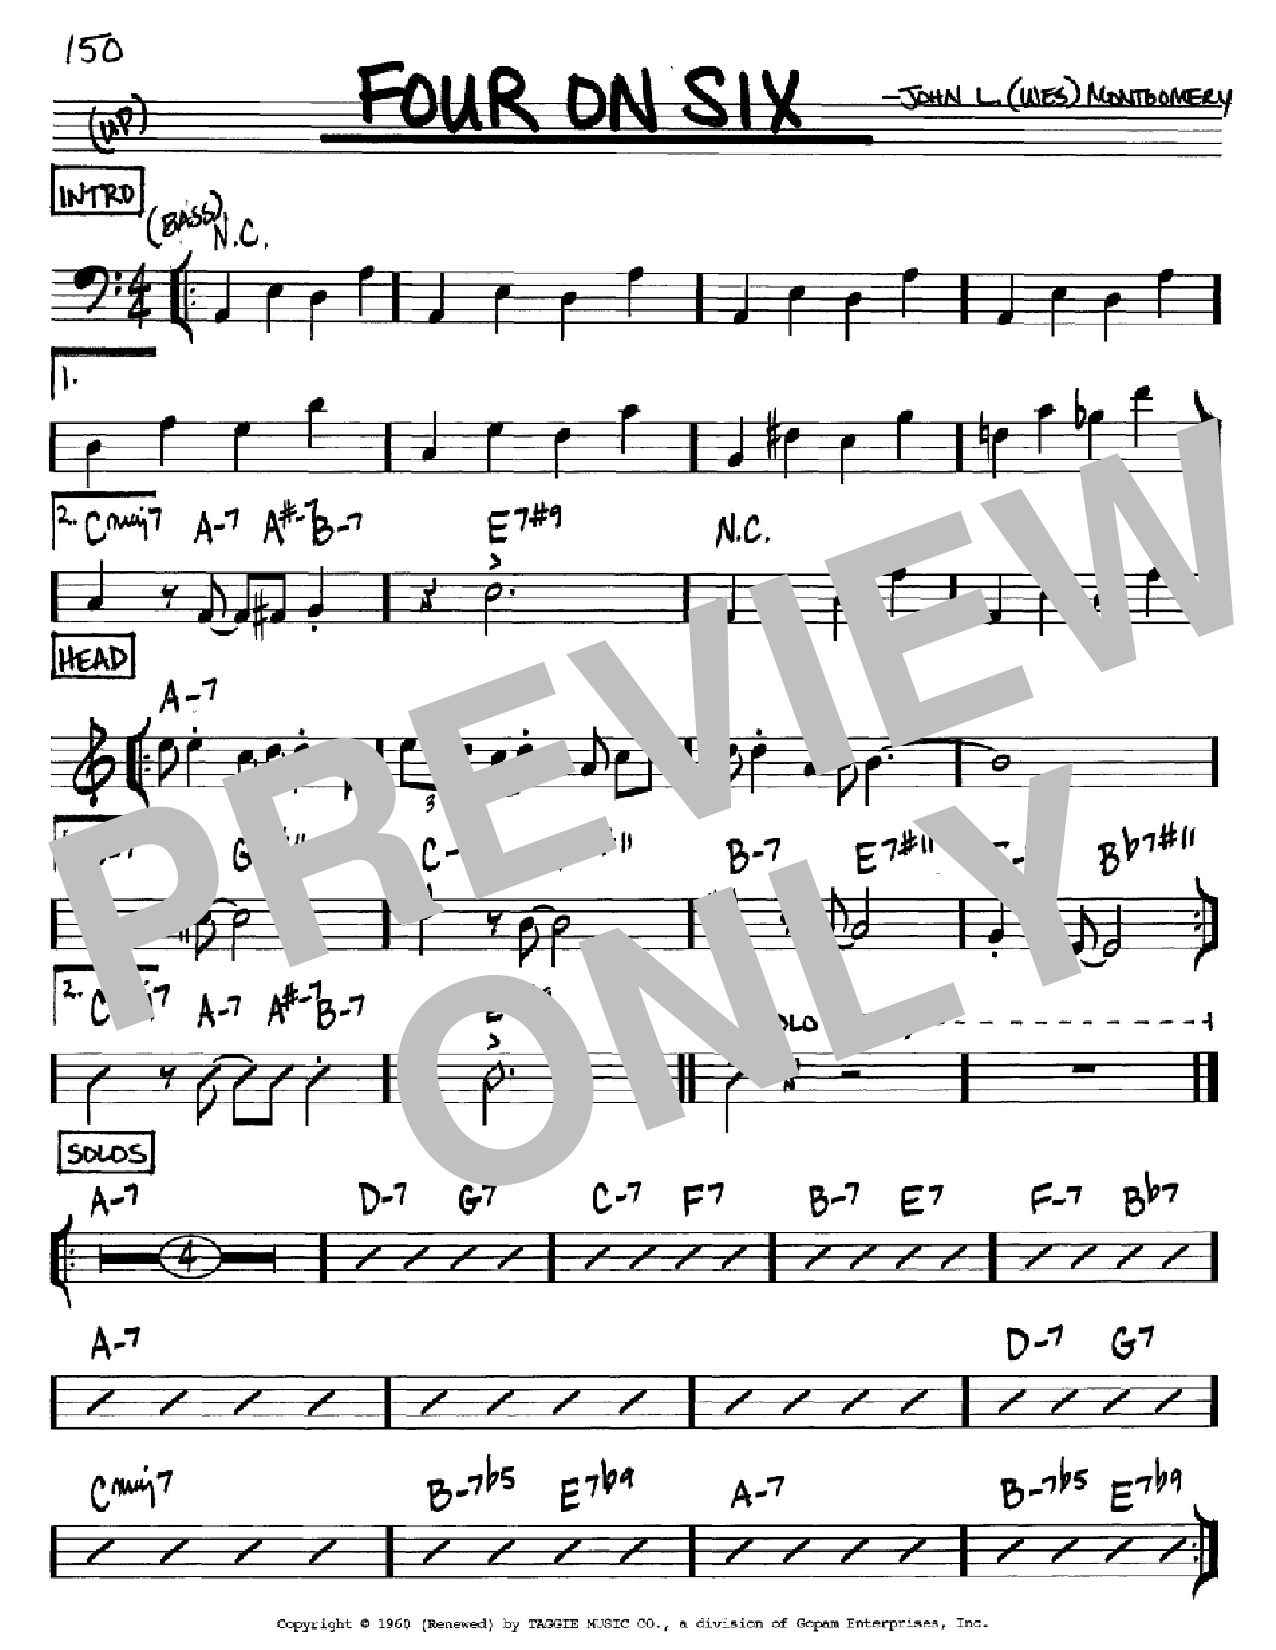 Download Wes Montgomery Four On Six Sheet Music